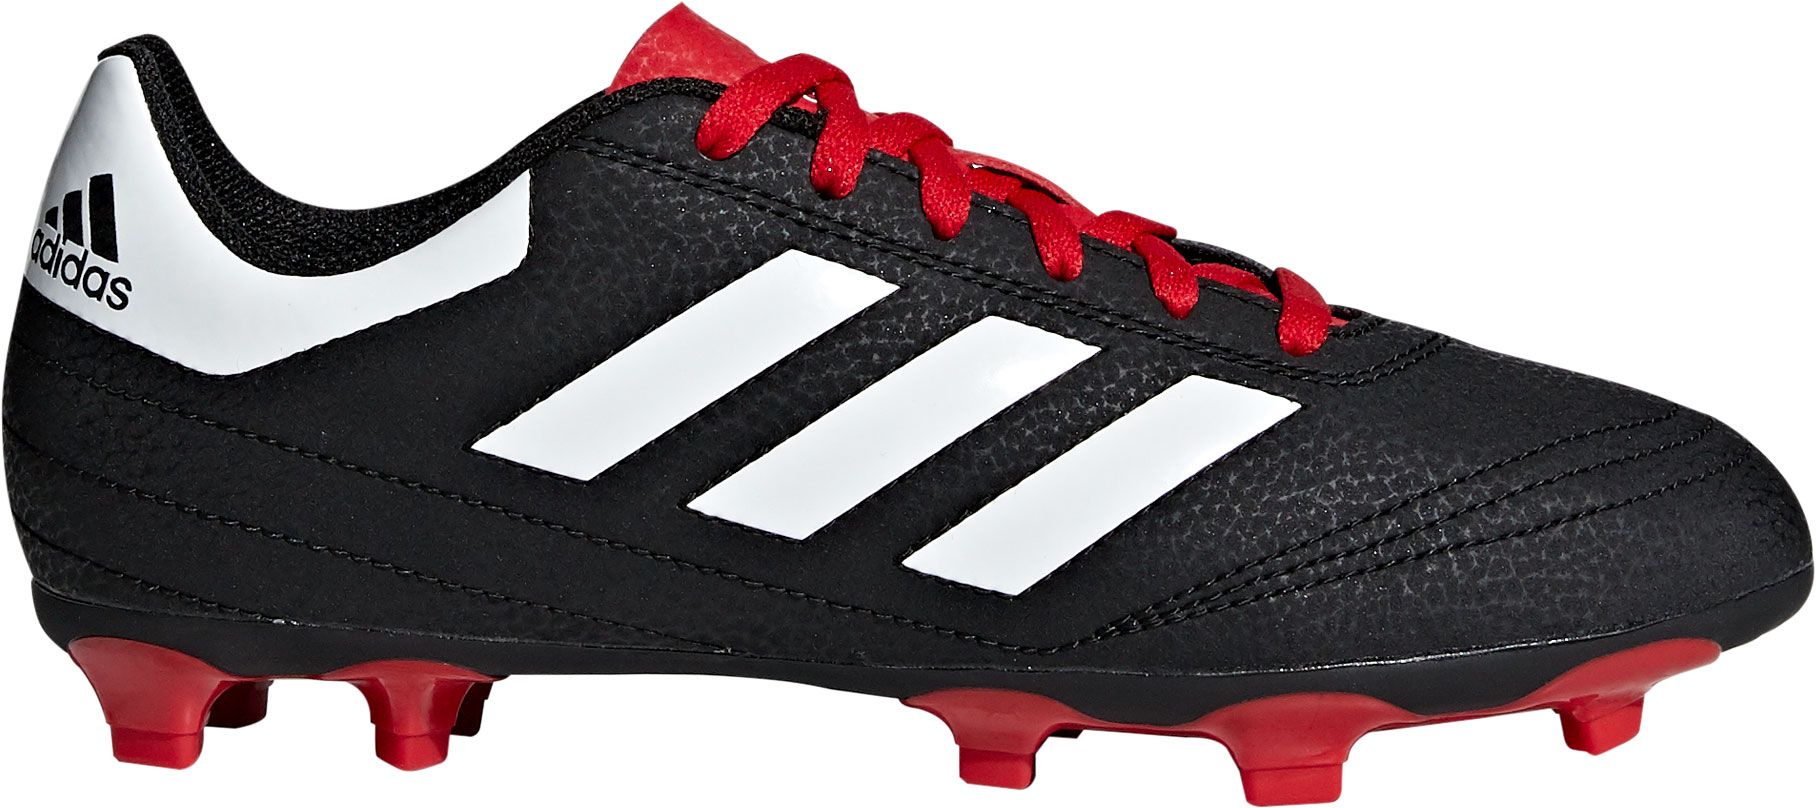 adidas red and black soccer cleats